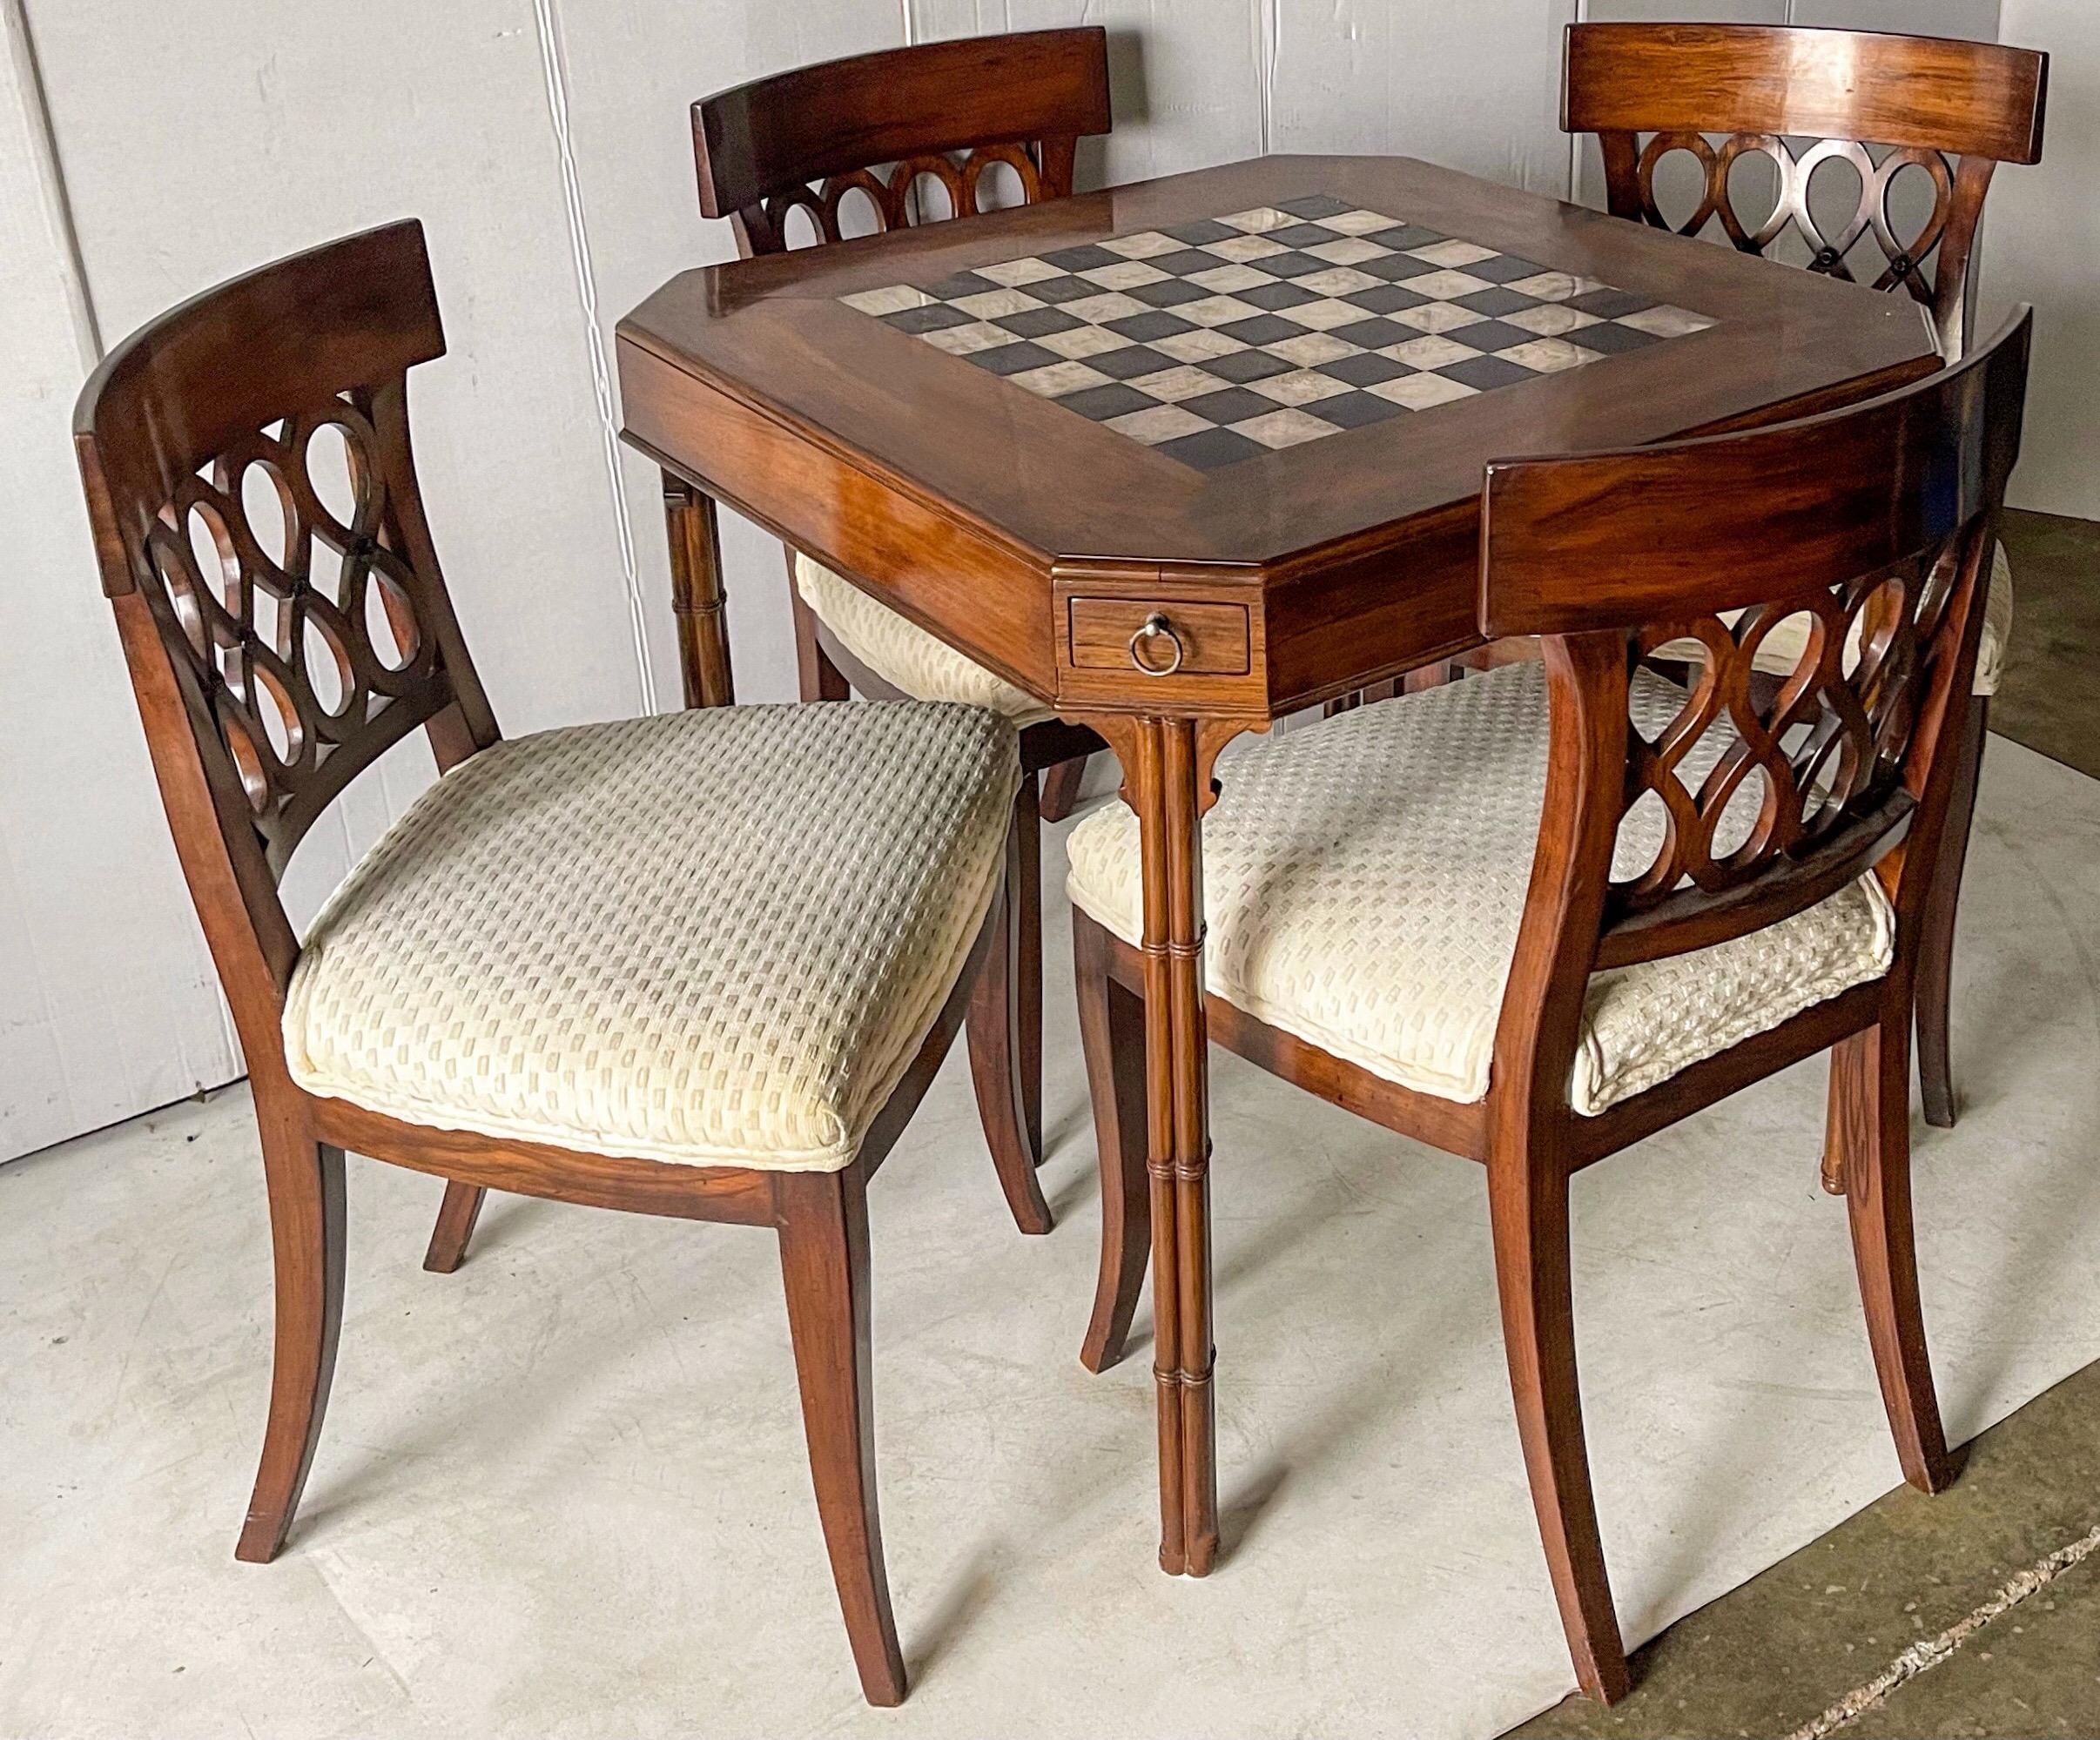 This is an incredible set! It is a Smith and Watson regency style game table and chairs. It was a privately commissioned set. The squares and pieces are silver plated. The carved mahogany faux bamboo table has drawers at each corner as well as two